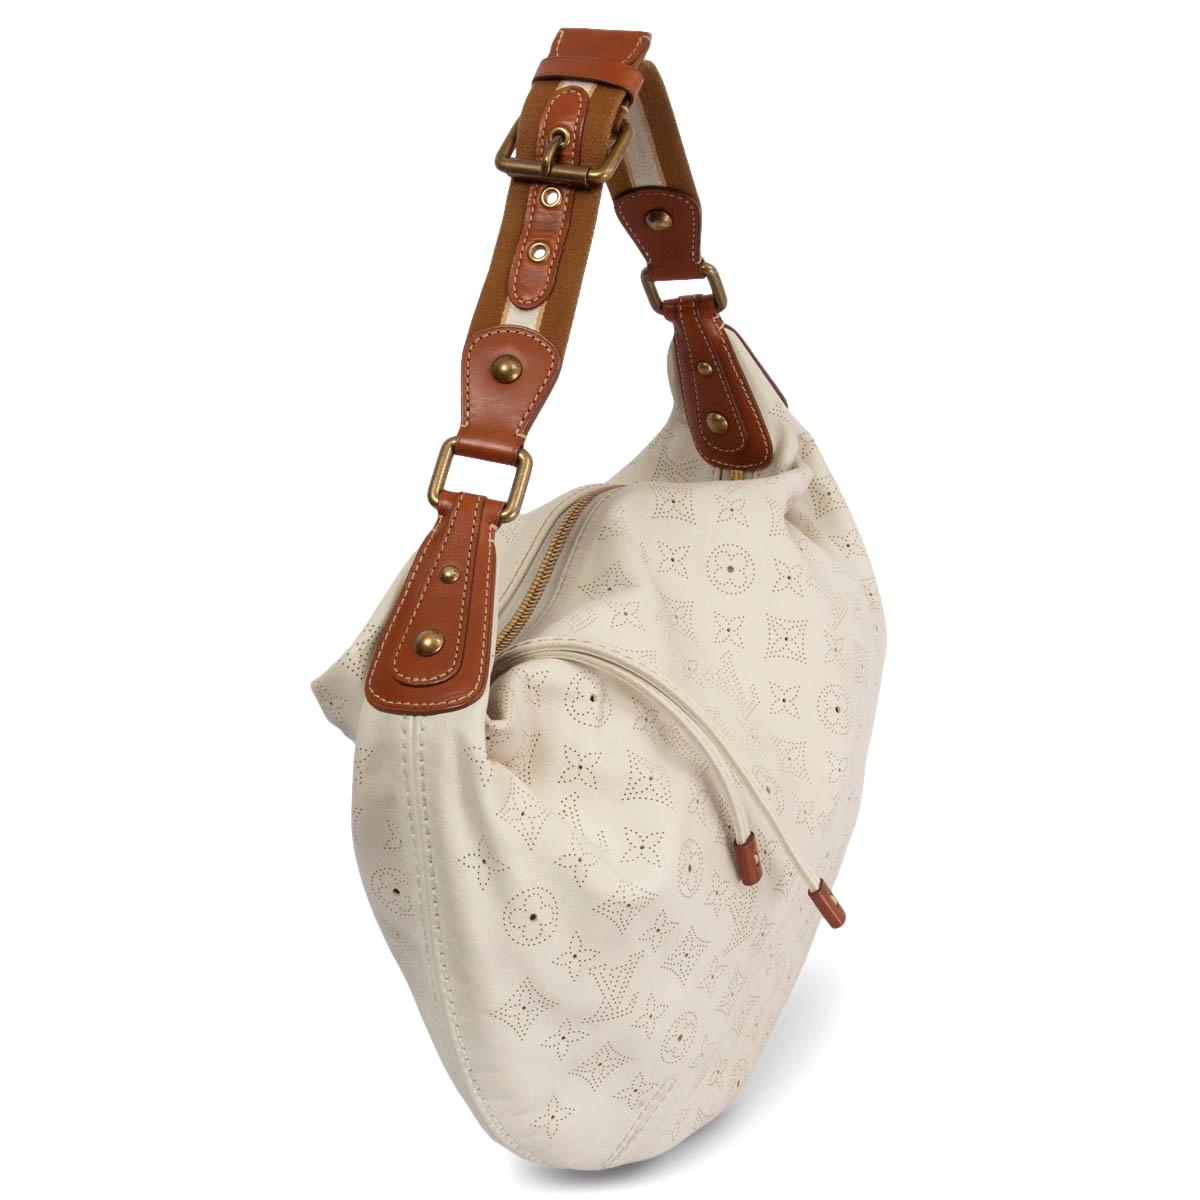 100% authentic Louis Vuitton Onatha GM Hobo in off-white Mahina leather with cognac leather trimming and off-white brown canvas shoulder strap. Opens with a tassel zipper on top and is lined in lilac and white flower print cotton with one open